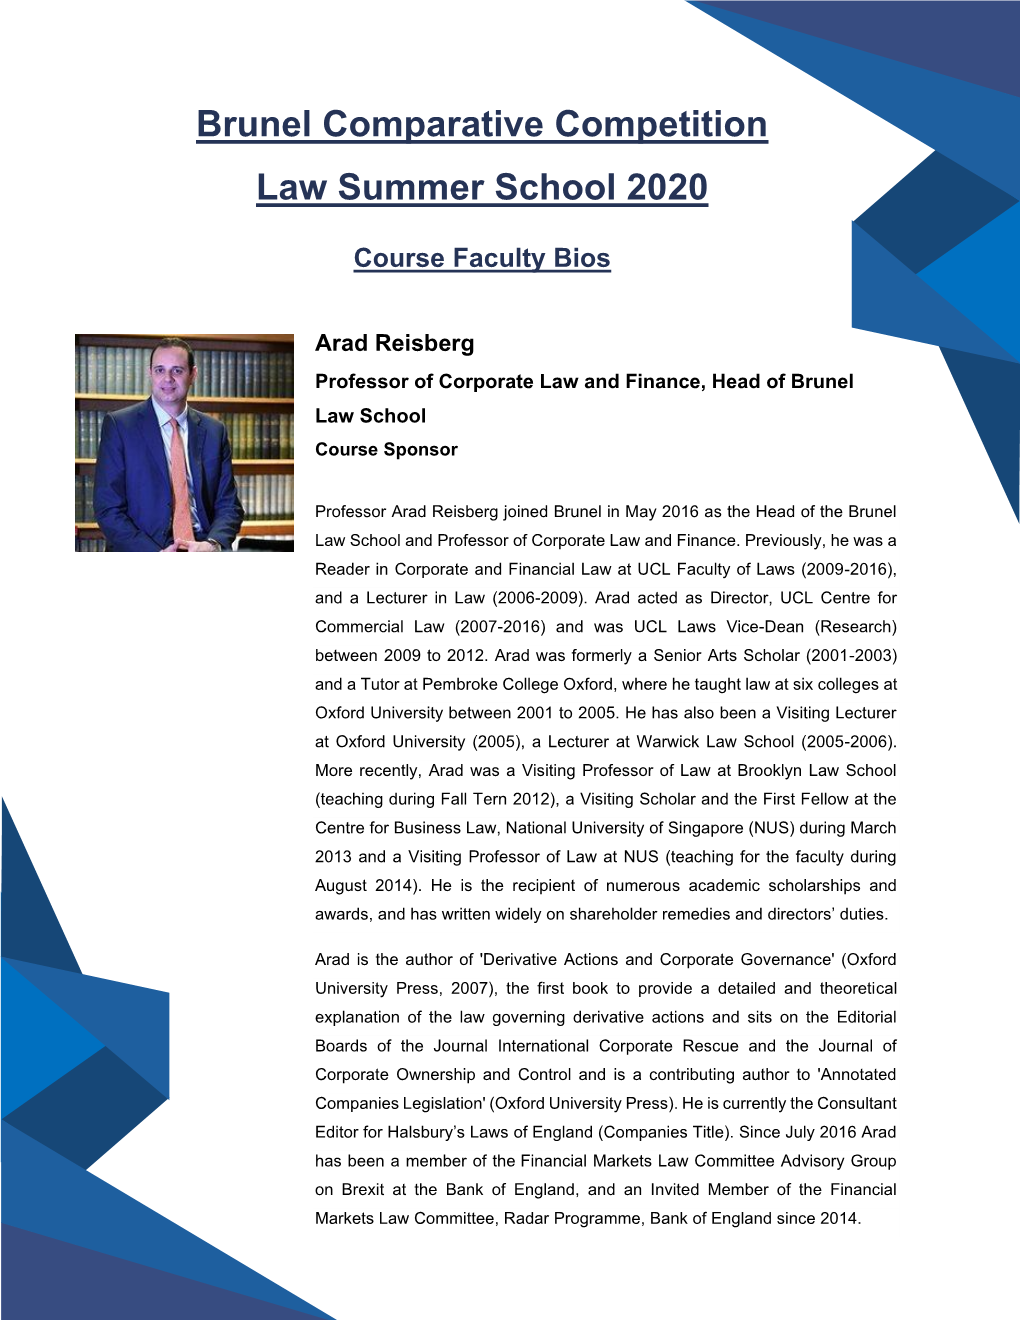 Brunel Comparative Competition Law Summer School 2020